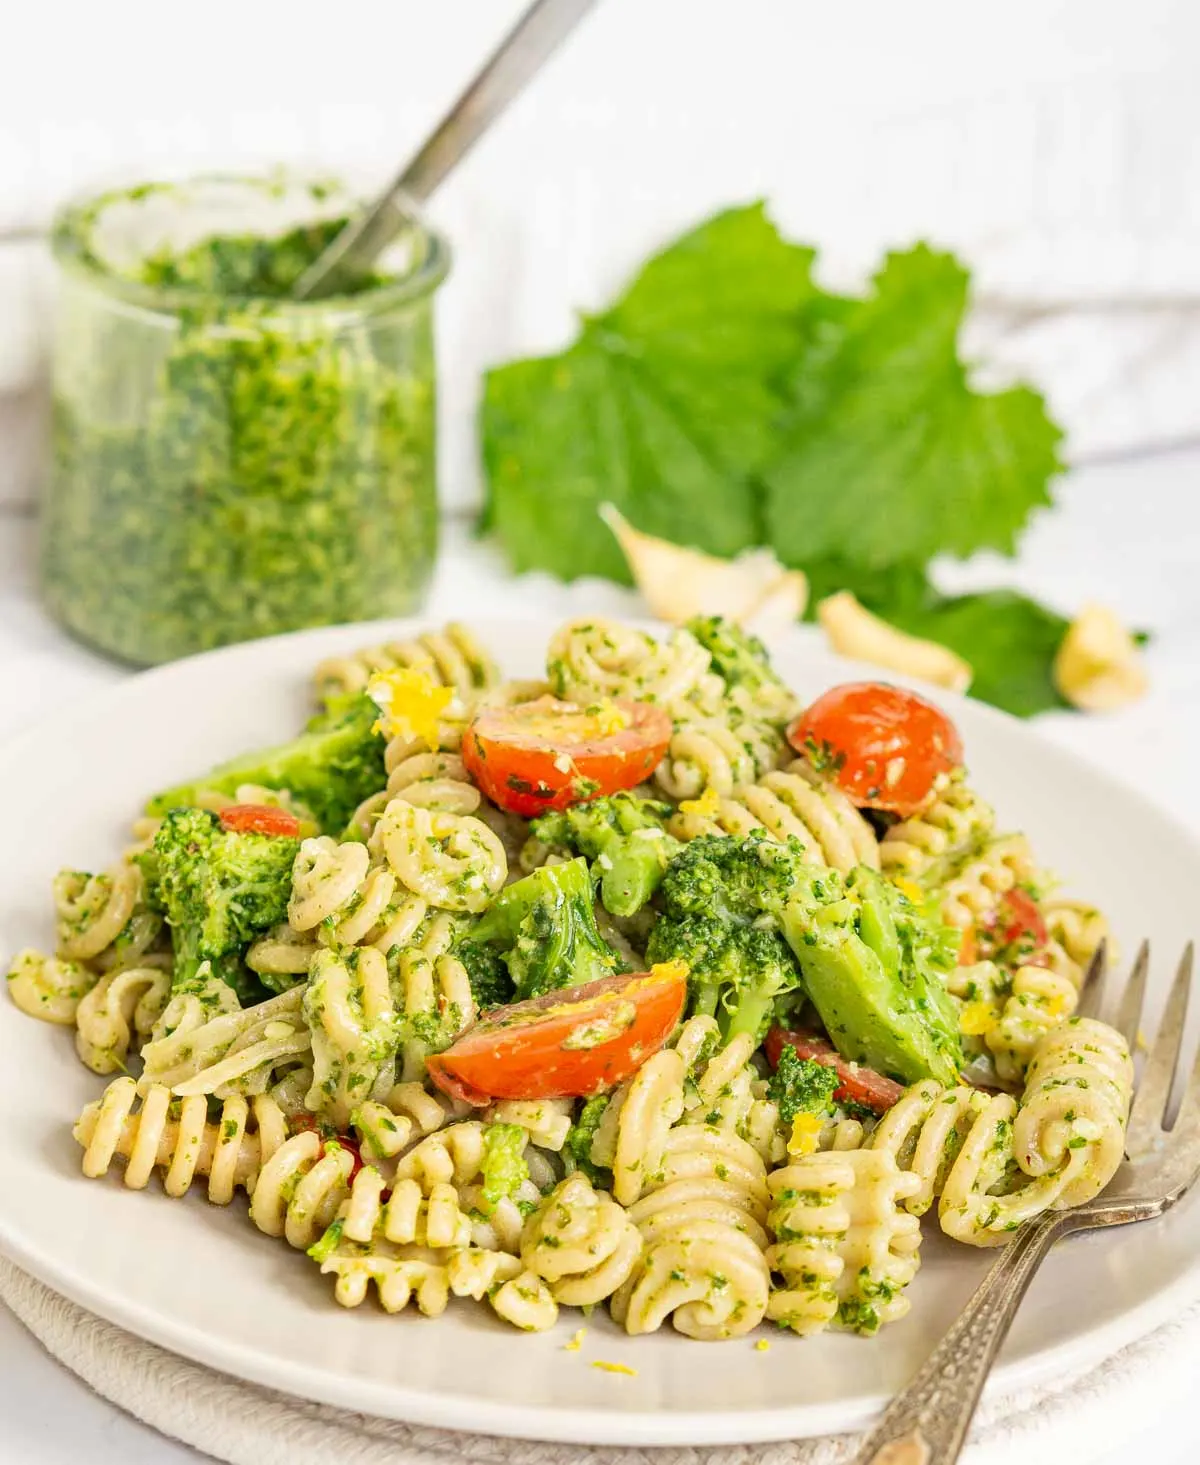 Plate of pesto pasta with tomatoes and broccoli